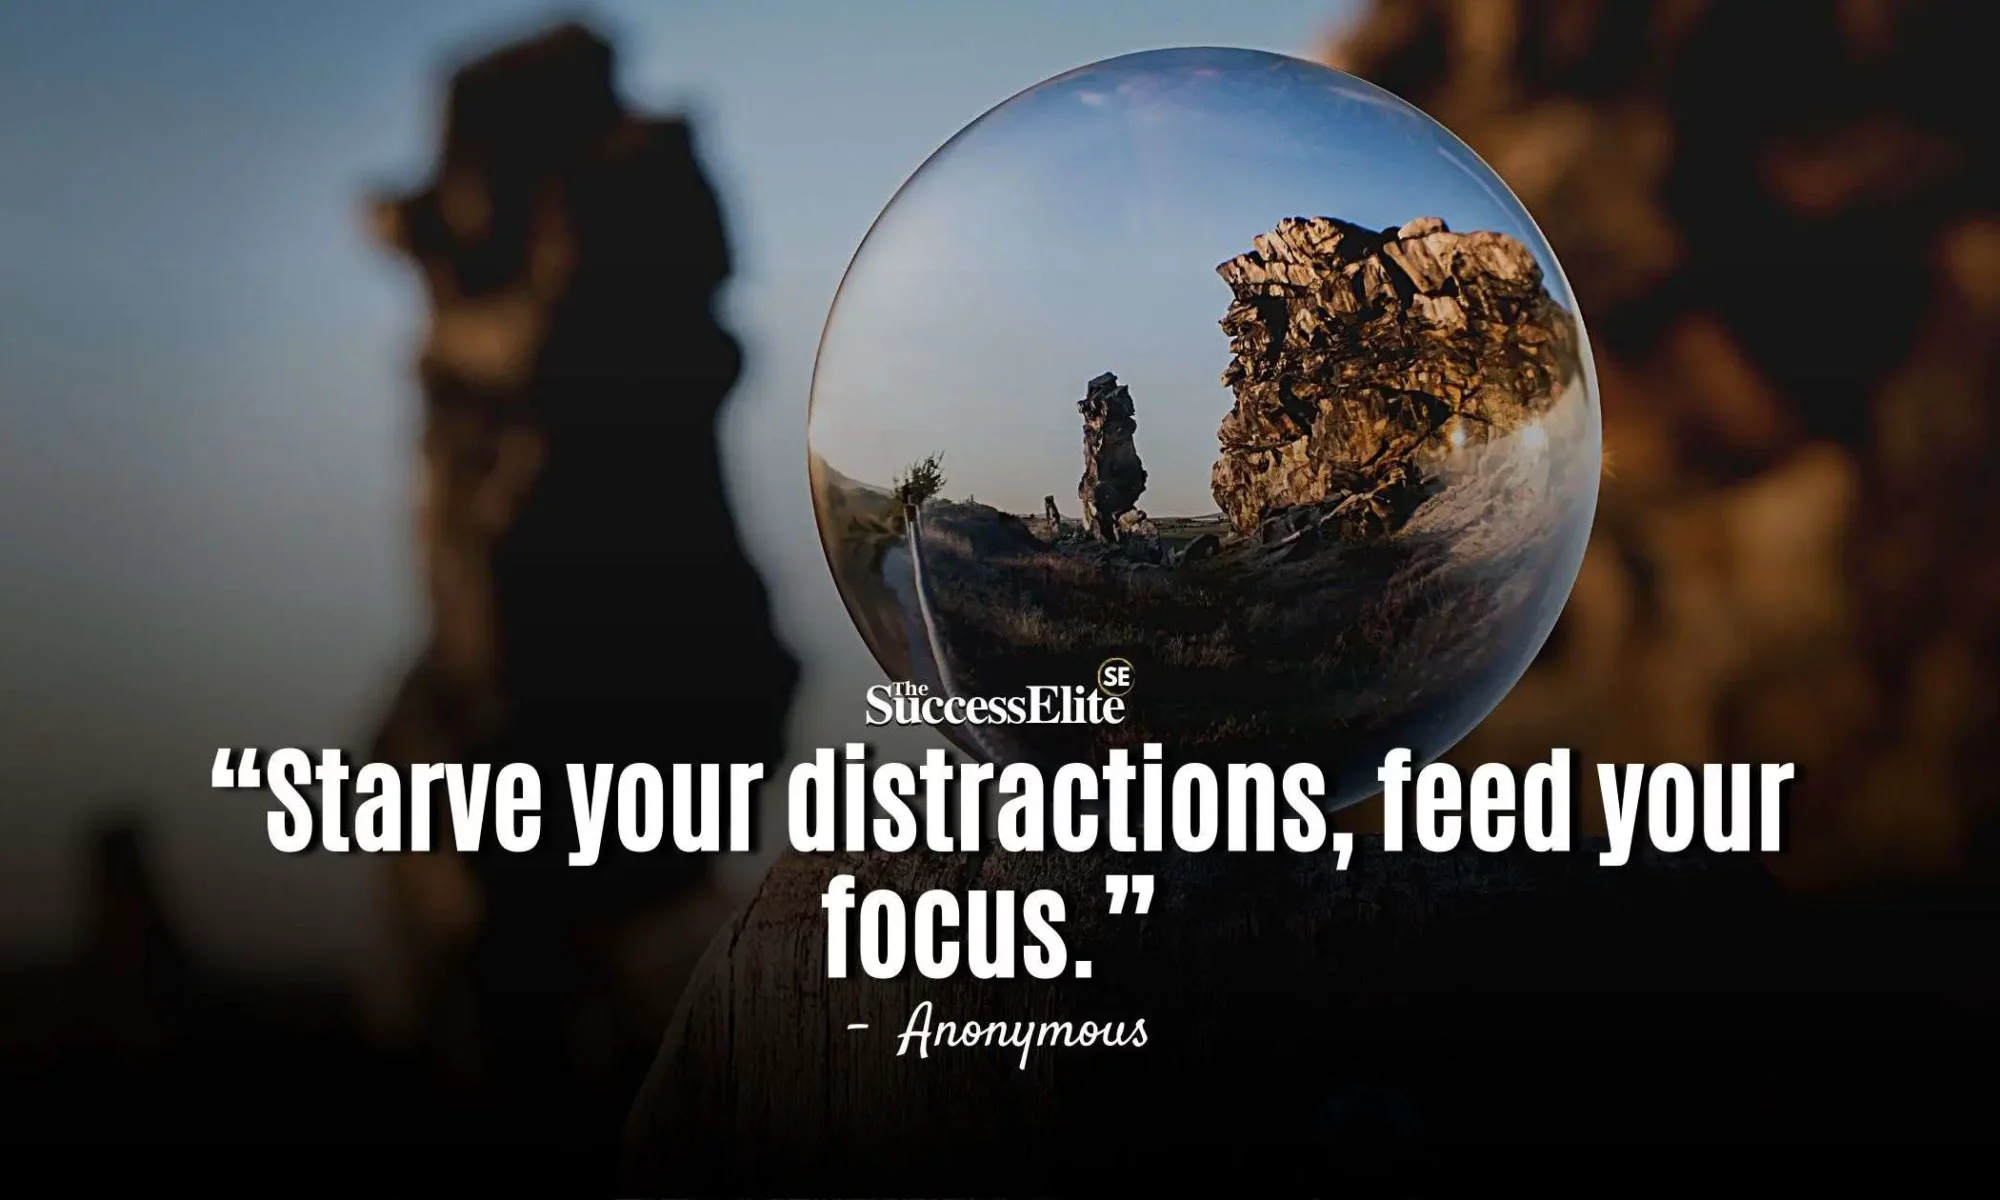 Feed Your Focus: Don't Allow Your Distractions to Destroy Your Destiny ~ Far too many people allow distractions to destroy their destinies. Feed Your Focus & Starve Your Distractions!